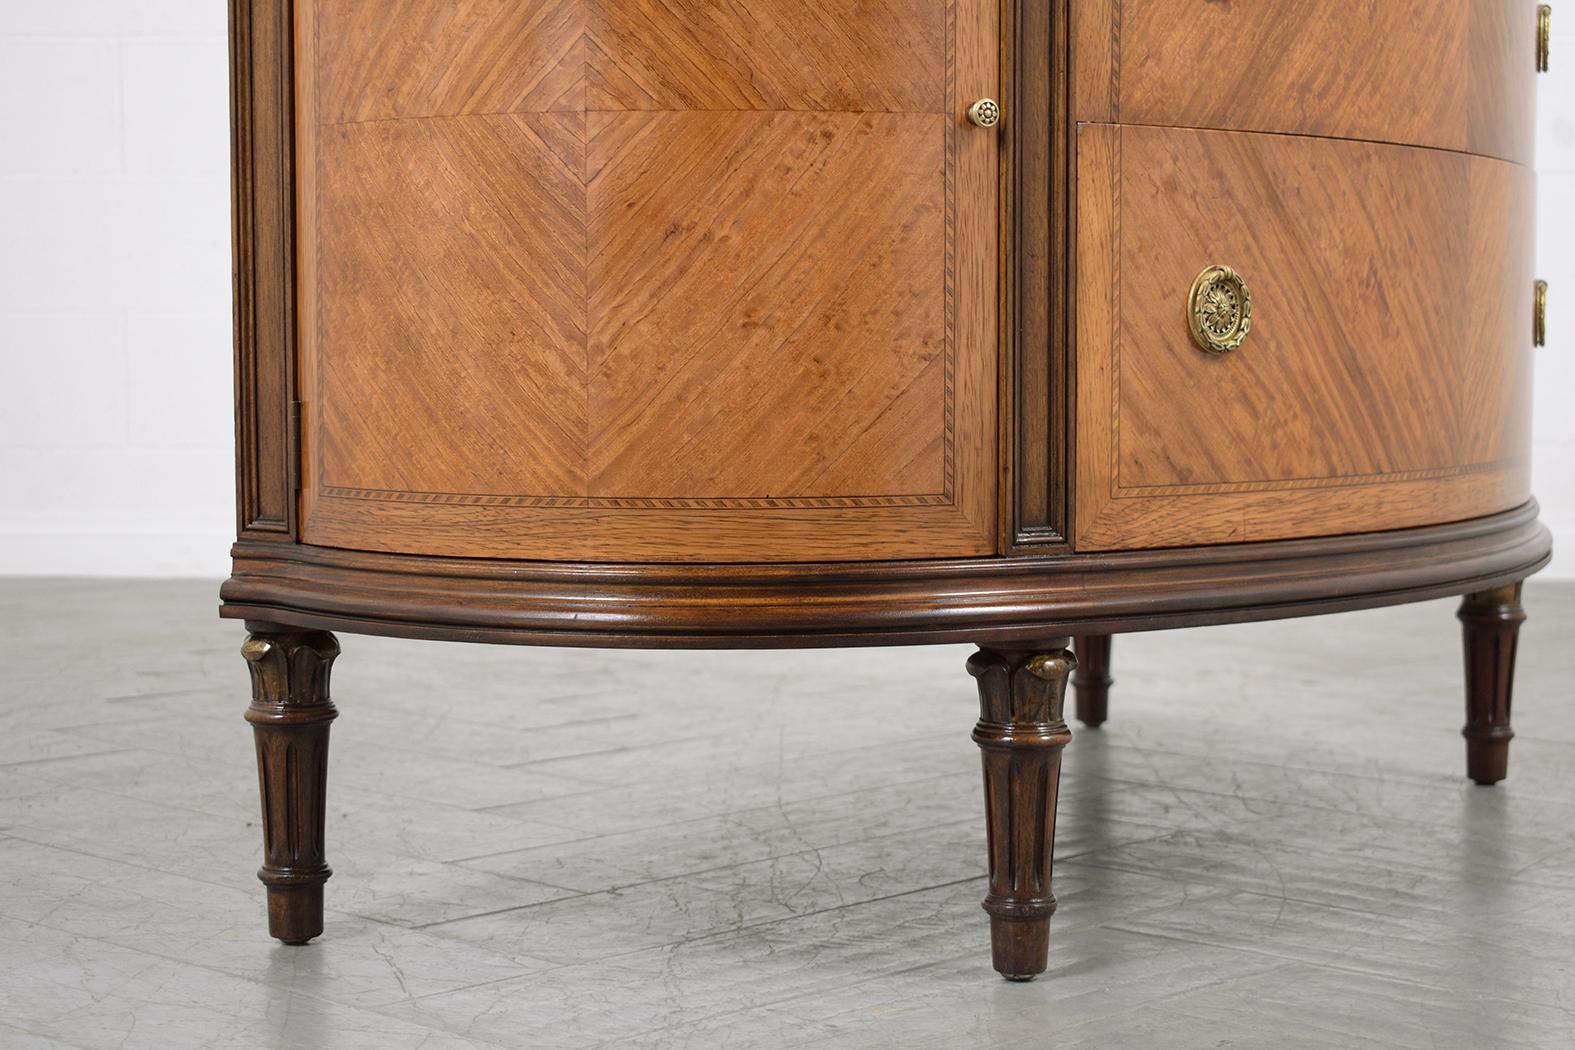 1940s Restored French Louis XVI Demilune Commode with Fruitwood Inlays & Molding 3